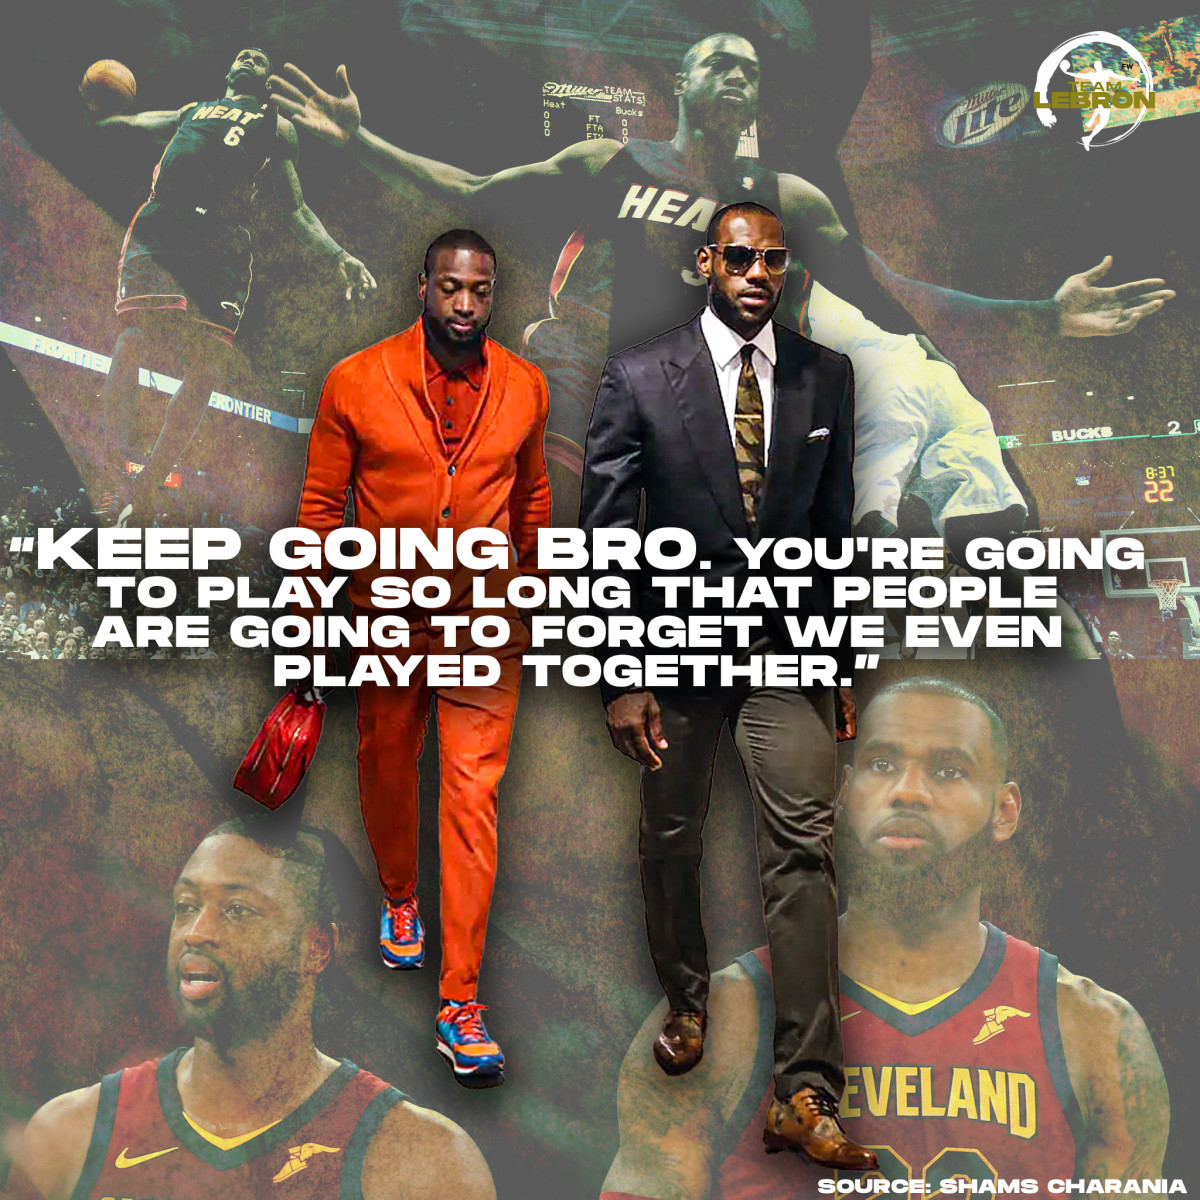 Dwyane Wade On LeBron James' 19th Season: "Keep Going, Bro. You’re Going To Play So Long That People Are Going To Forget We Even Played Together."